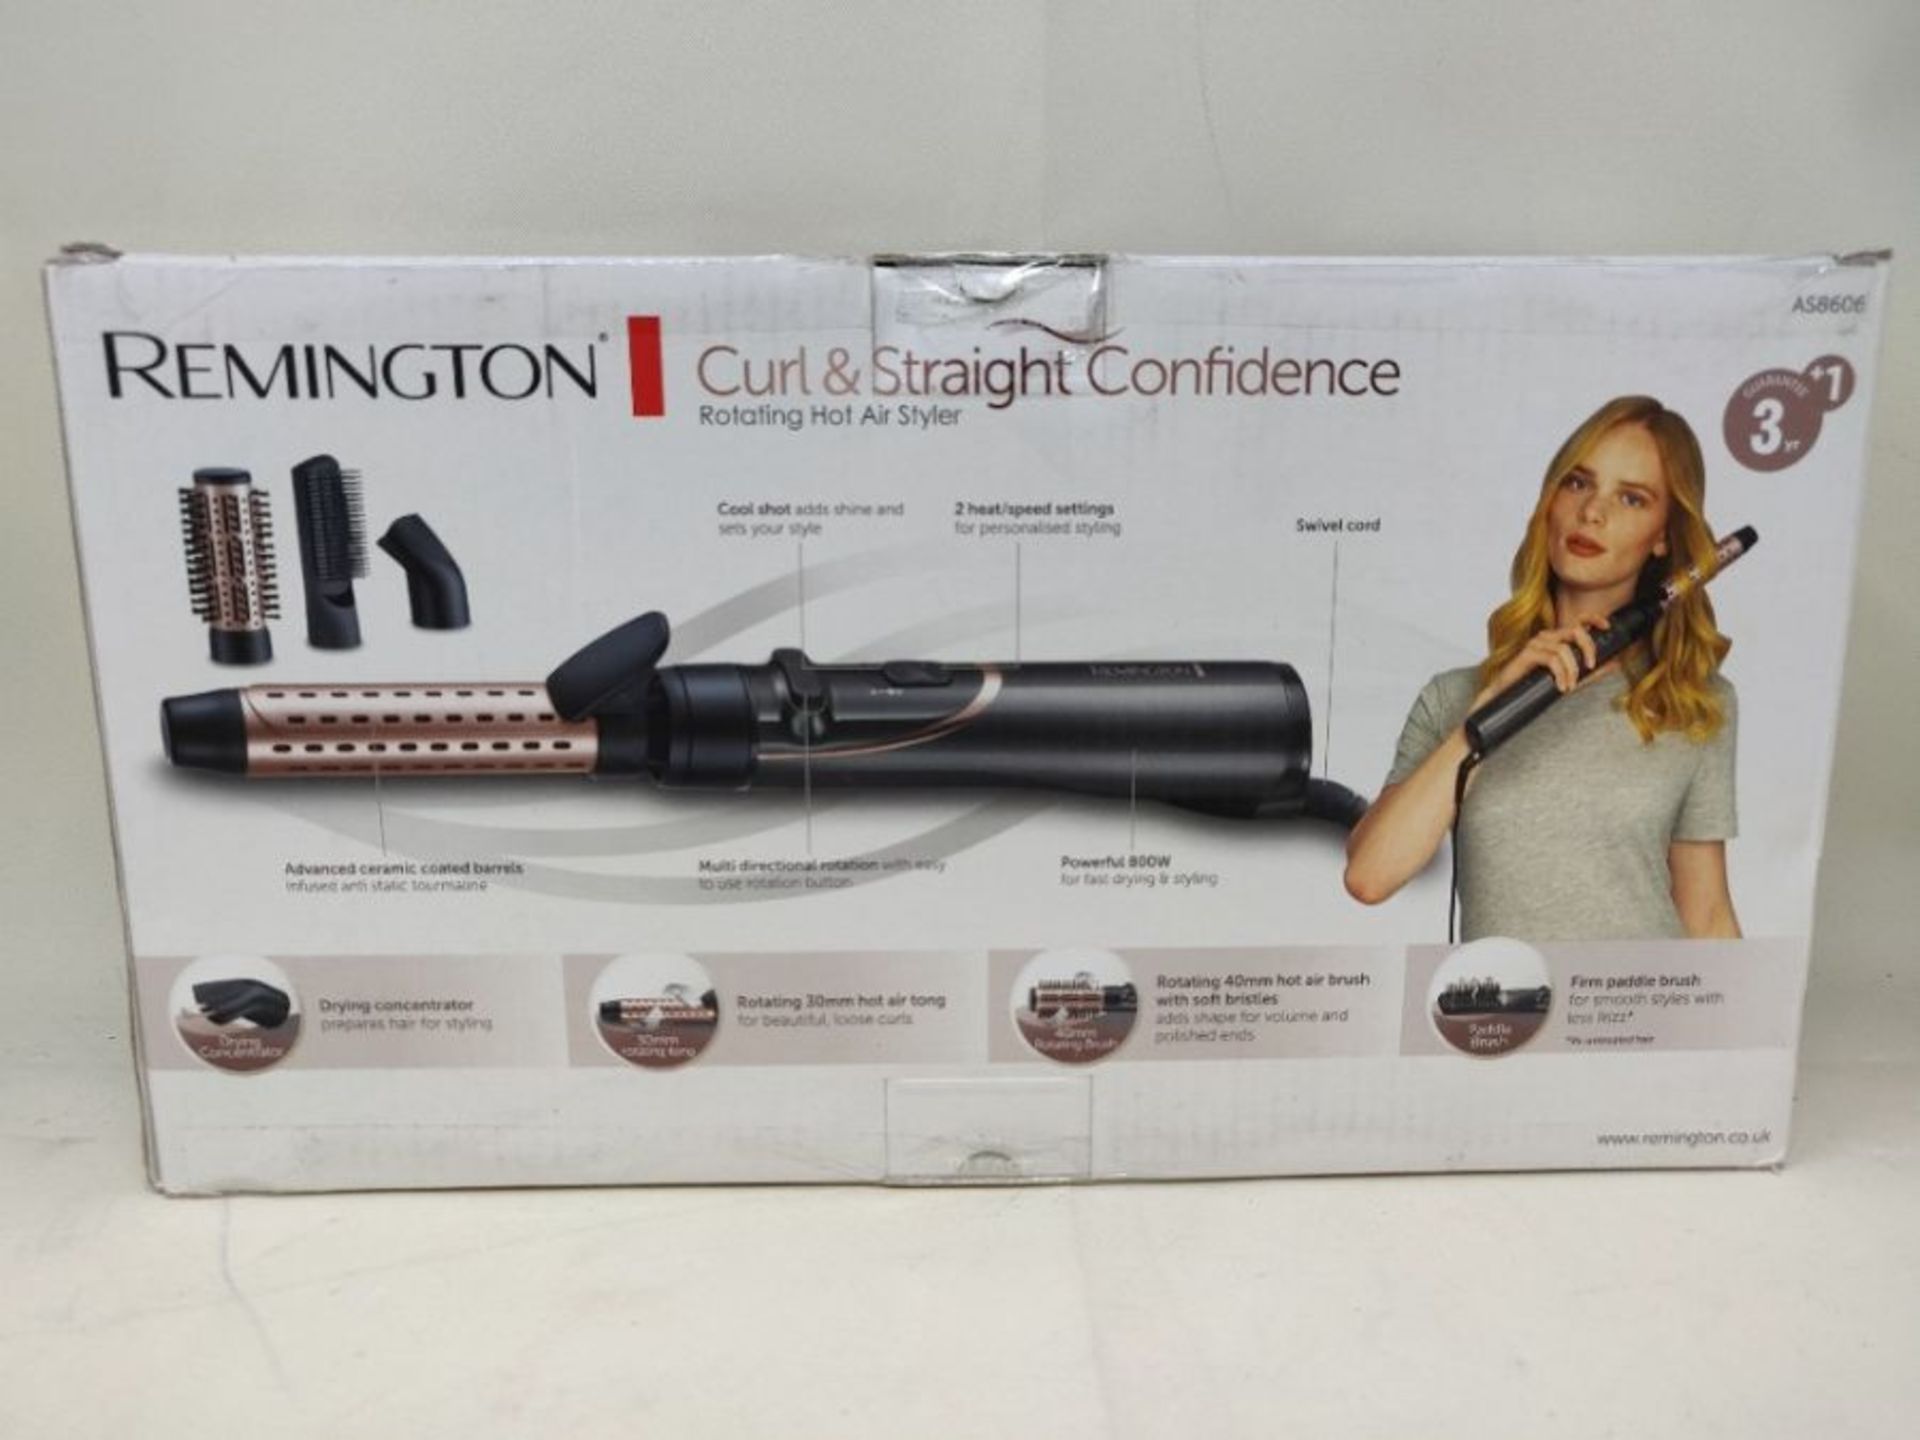 RRP £52.00 Remington Curl and Straight Confidence Rotating Hot Air Styler - Versatile Curling Iro - Image 2 of 3